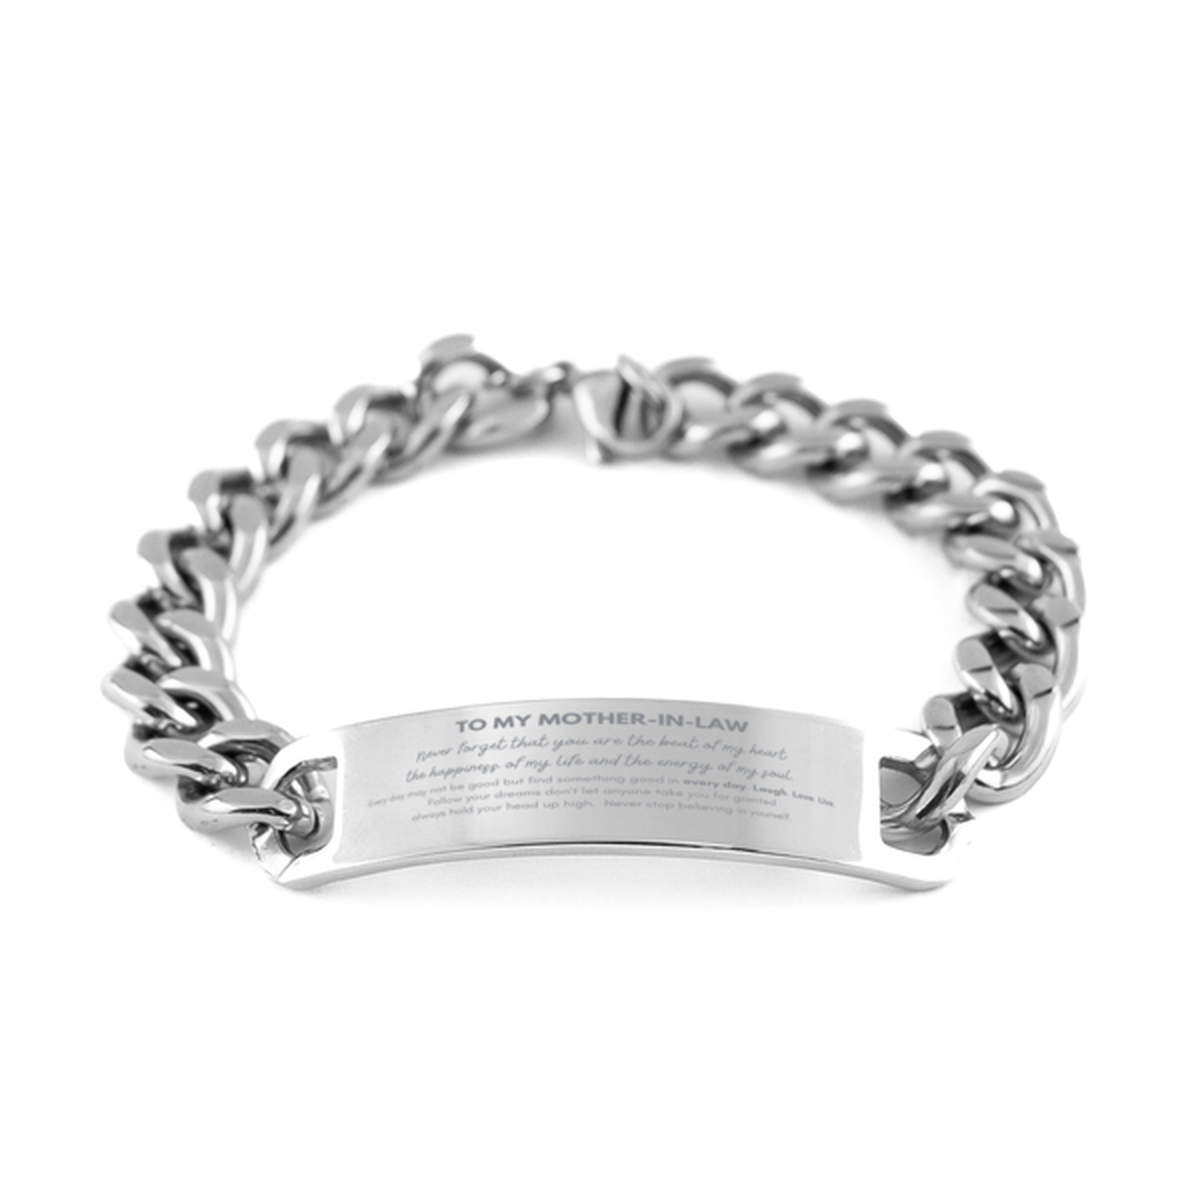 To My Mother-In-Law Bracelet Gifts, Christmas Mother-In-Law Cuban Chain Stainless Steel Bracelet Present, Birthday Unique Motivational For Mother-In-Law, To My Mother-In-Law Never forget that you are the beat of my heart the happiness of my life and the e